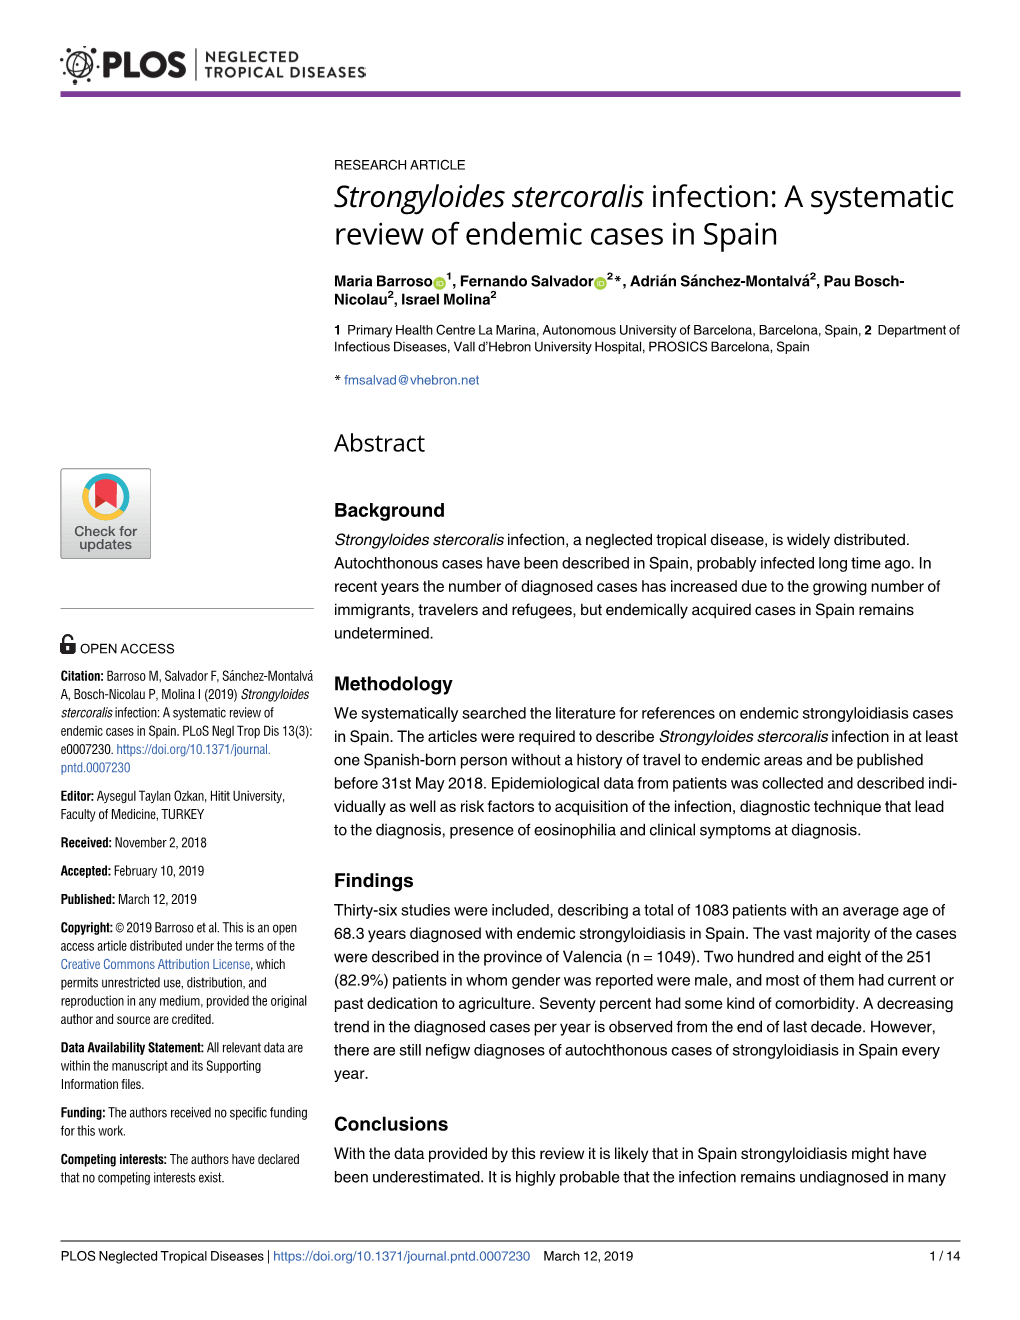 Strongyloides Stercoralis Infection: a Systematic Review of Endemic Cases in Spain